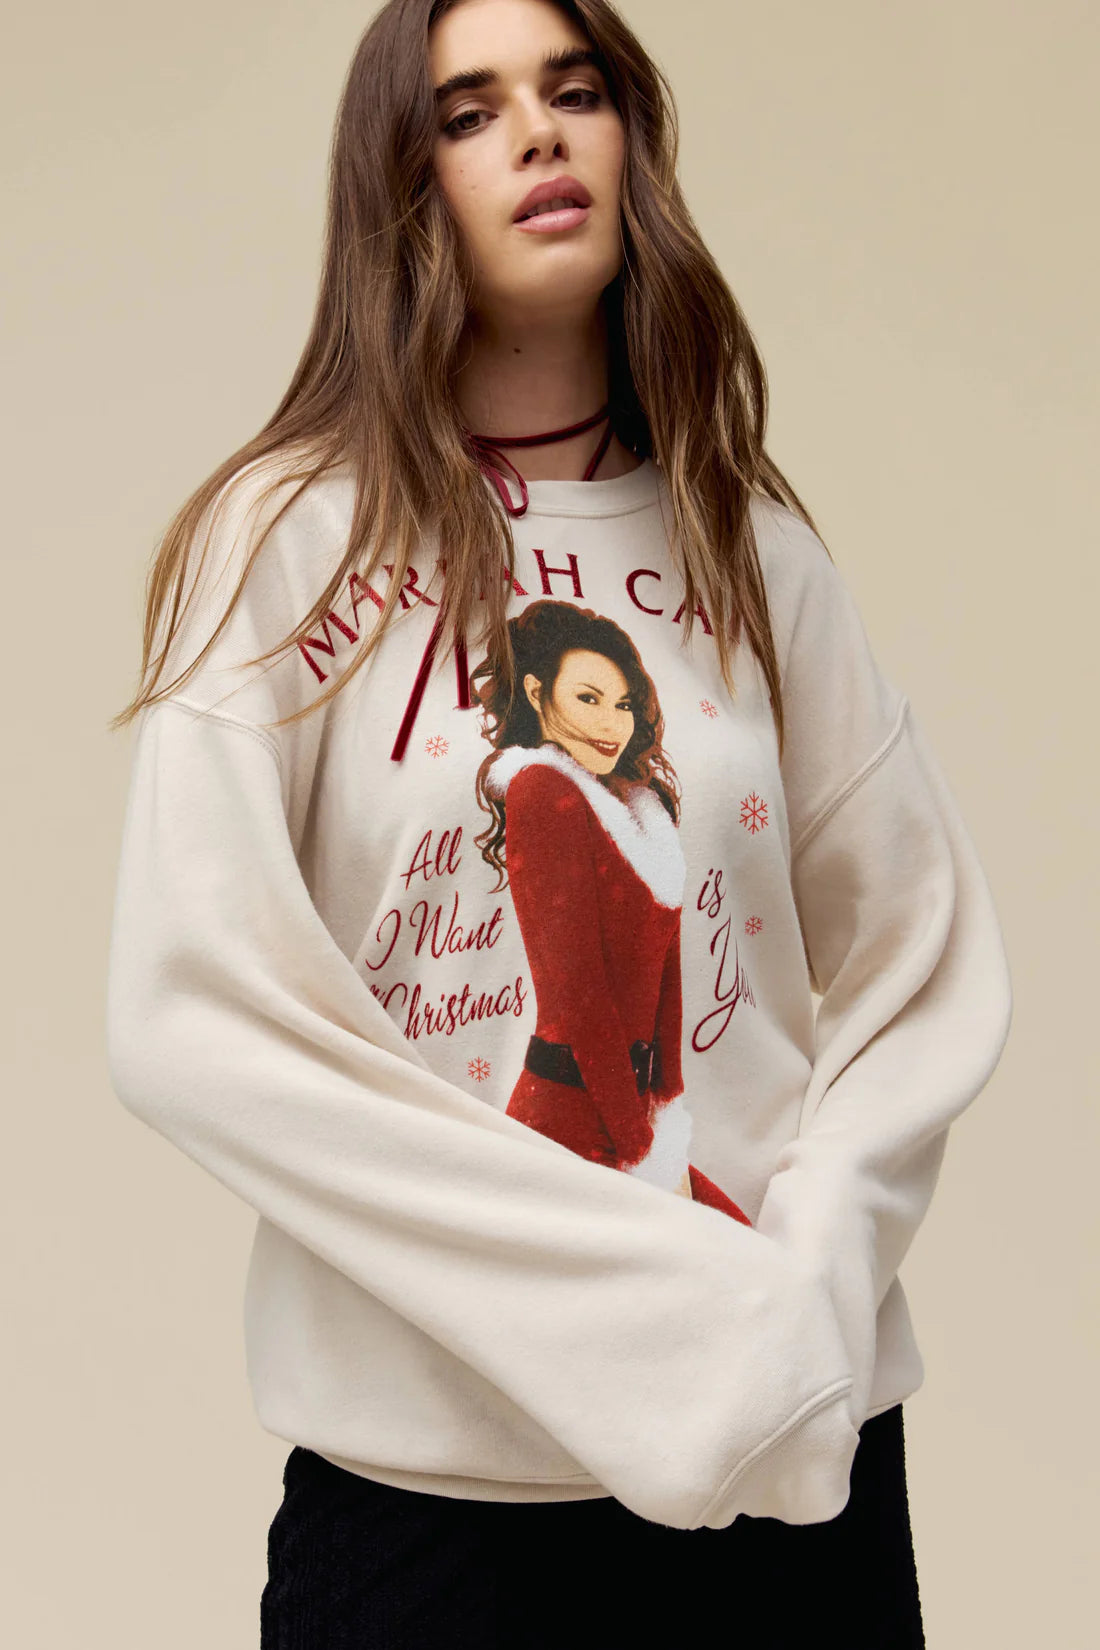 Load image into Gallery viewer, daydreamer mariah carey all i want for christmas oversized bf crew
